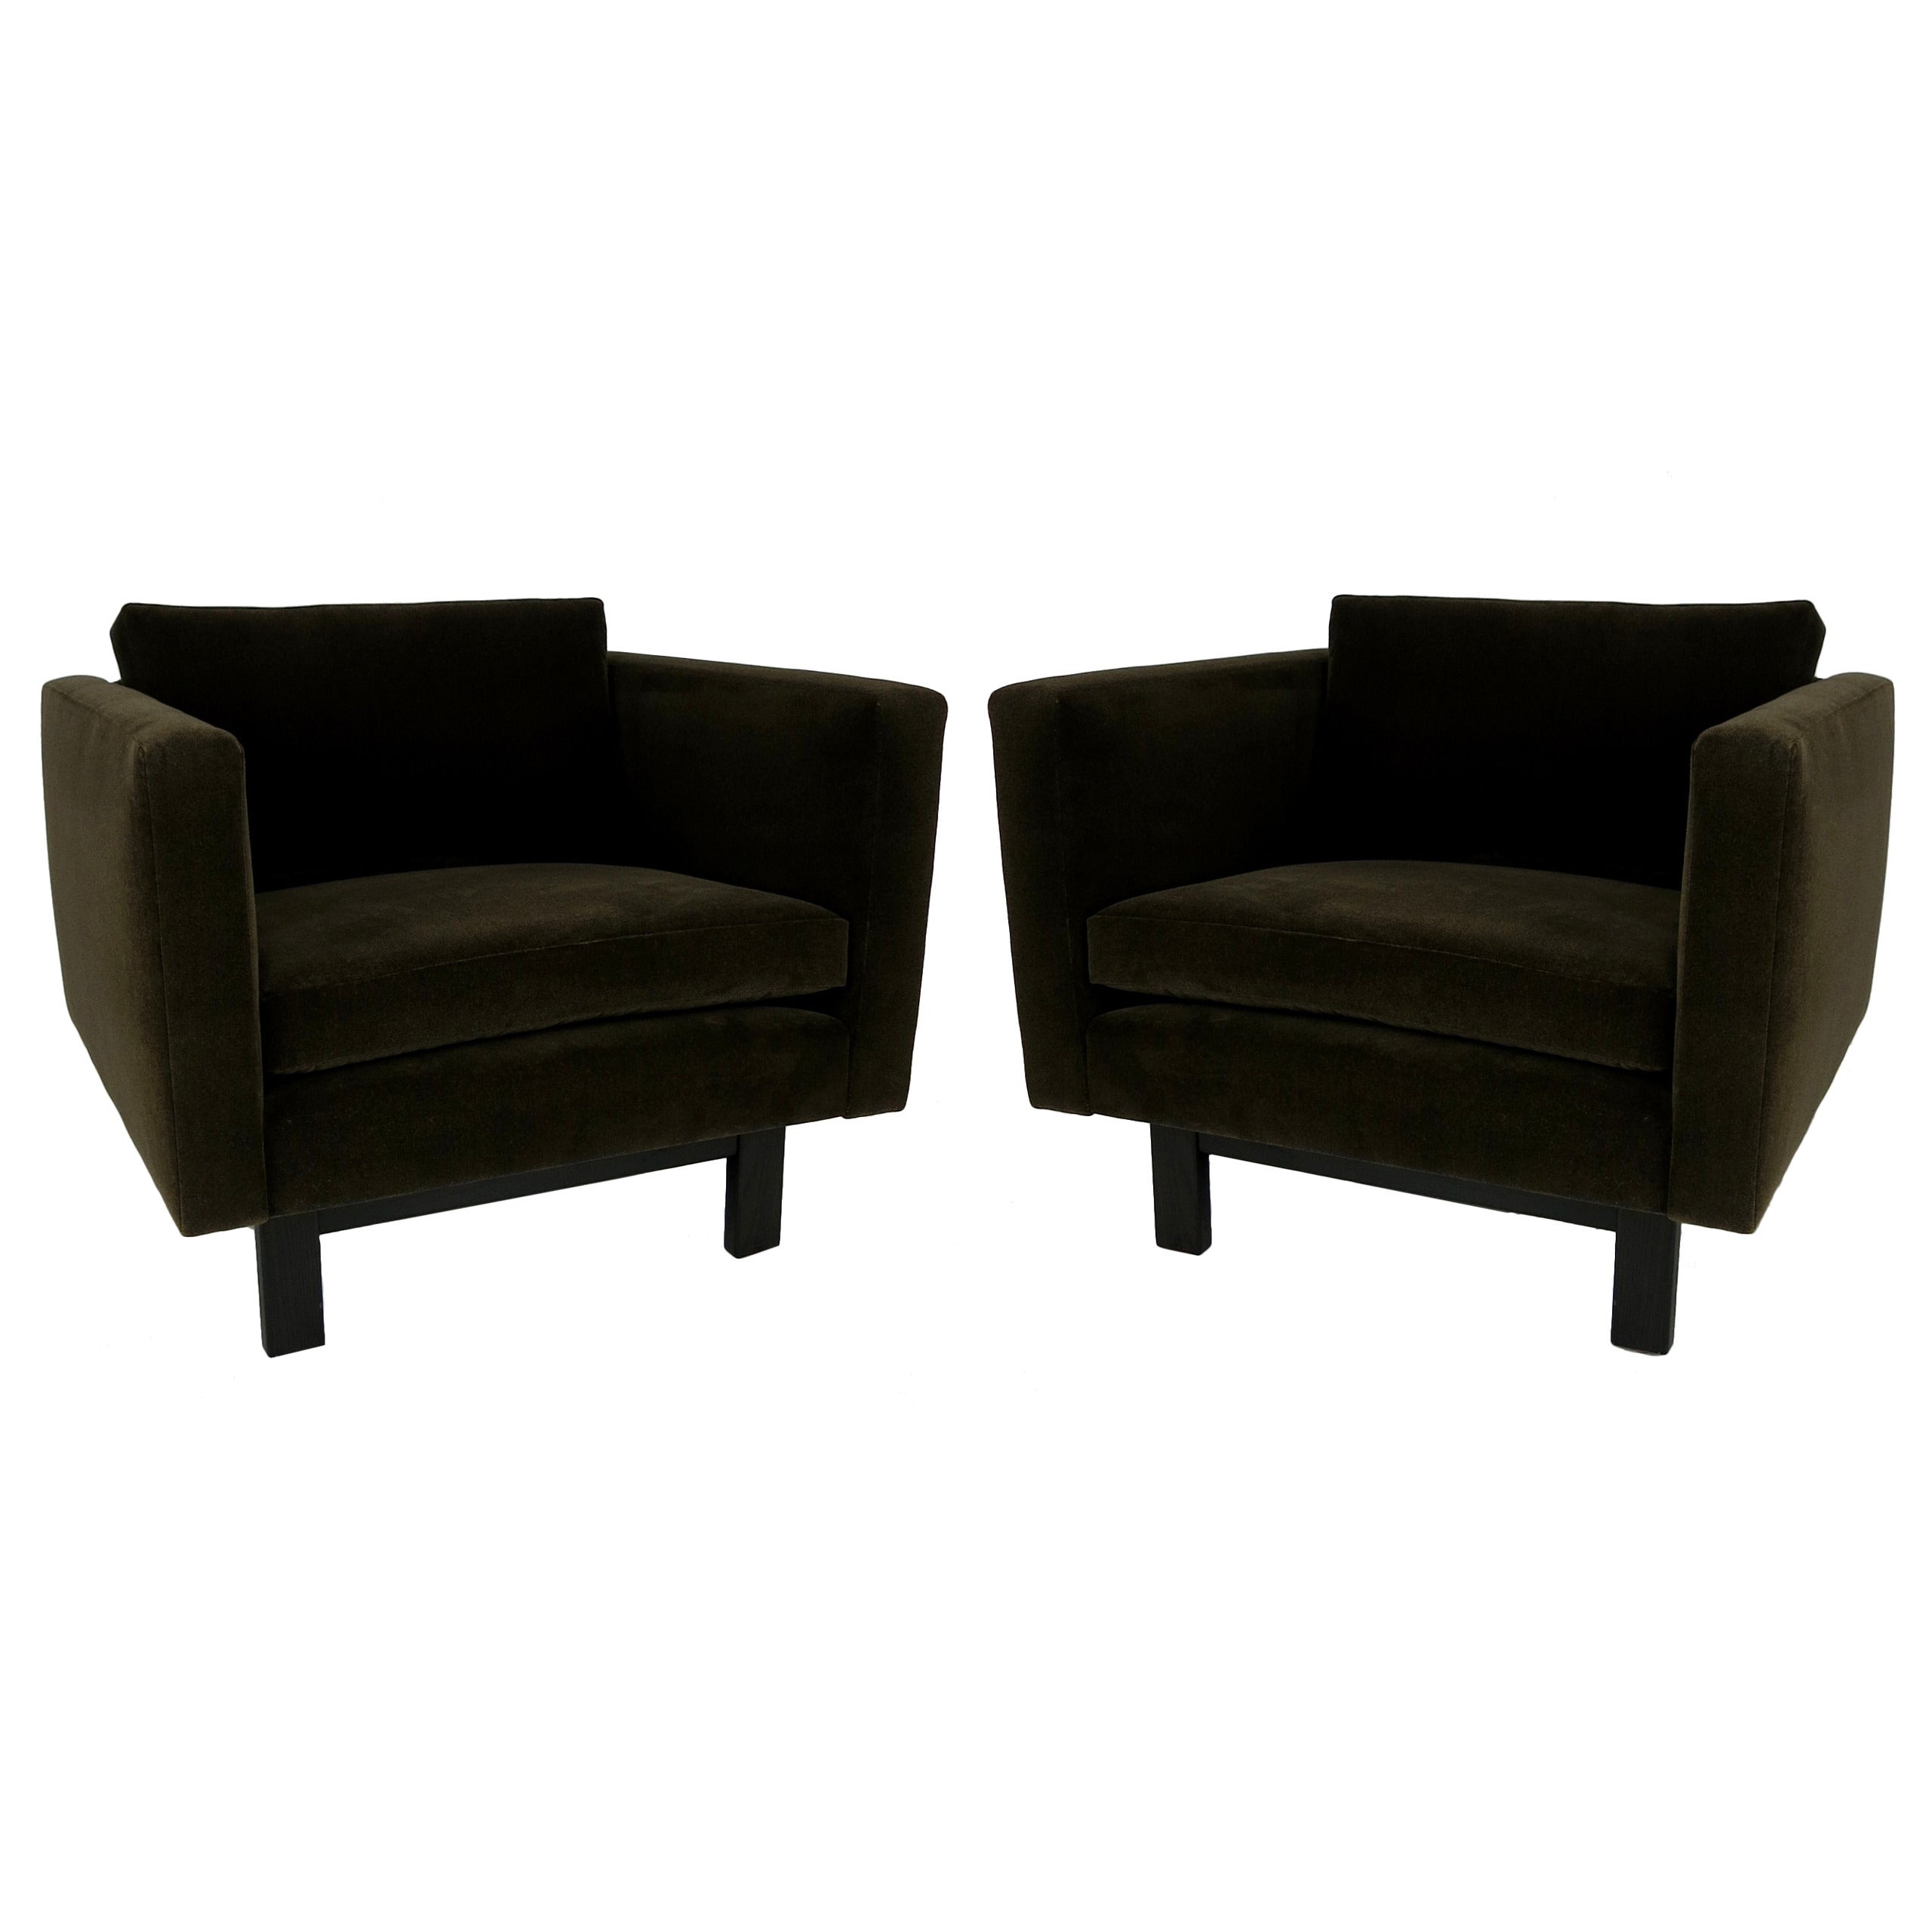 Pair of Harvey Probber Open-Frame Lounge Chairs